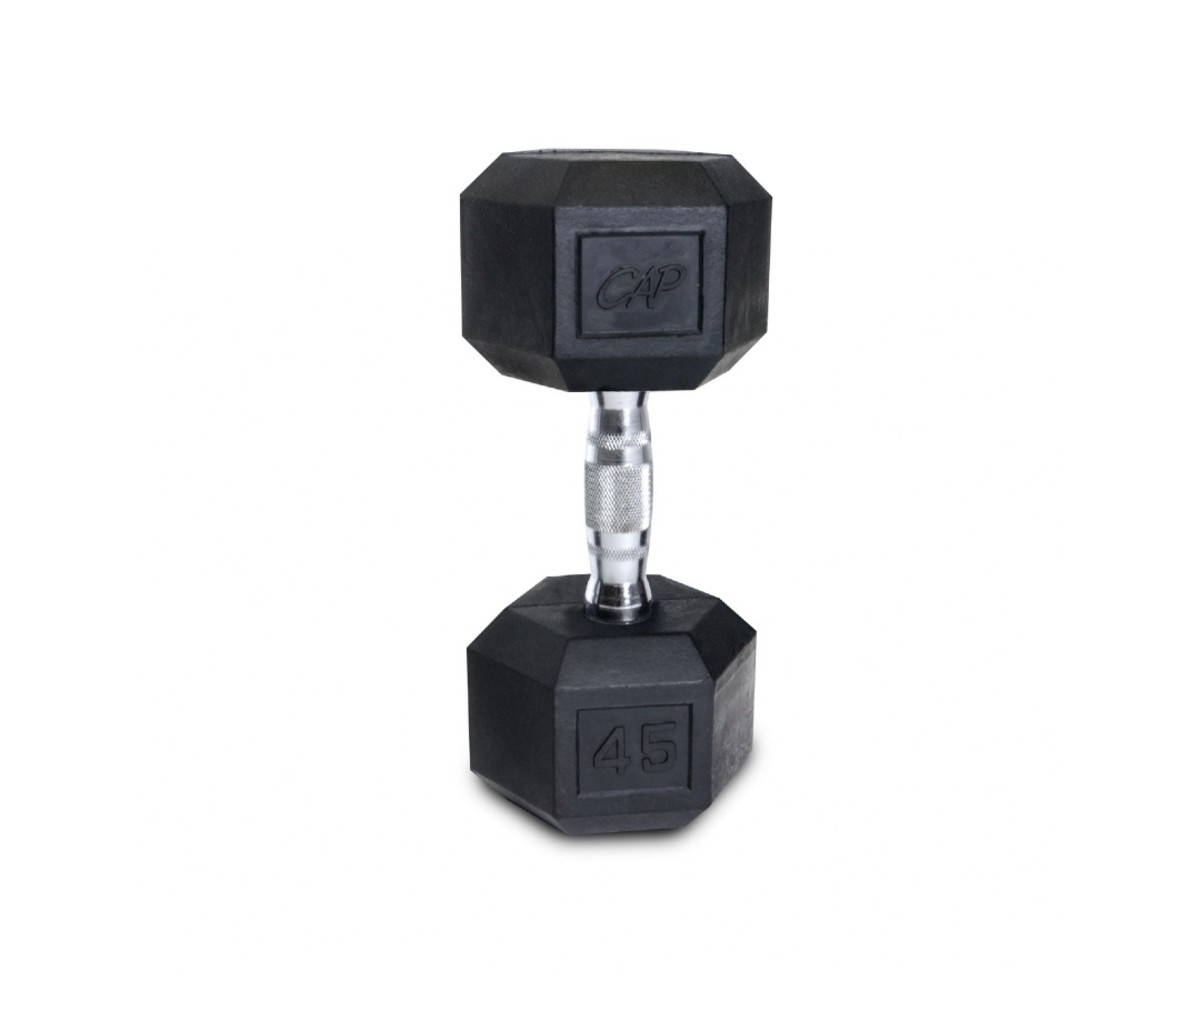 Rubber-coated hex dumbbell on a white background.